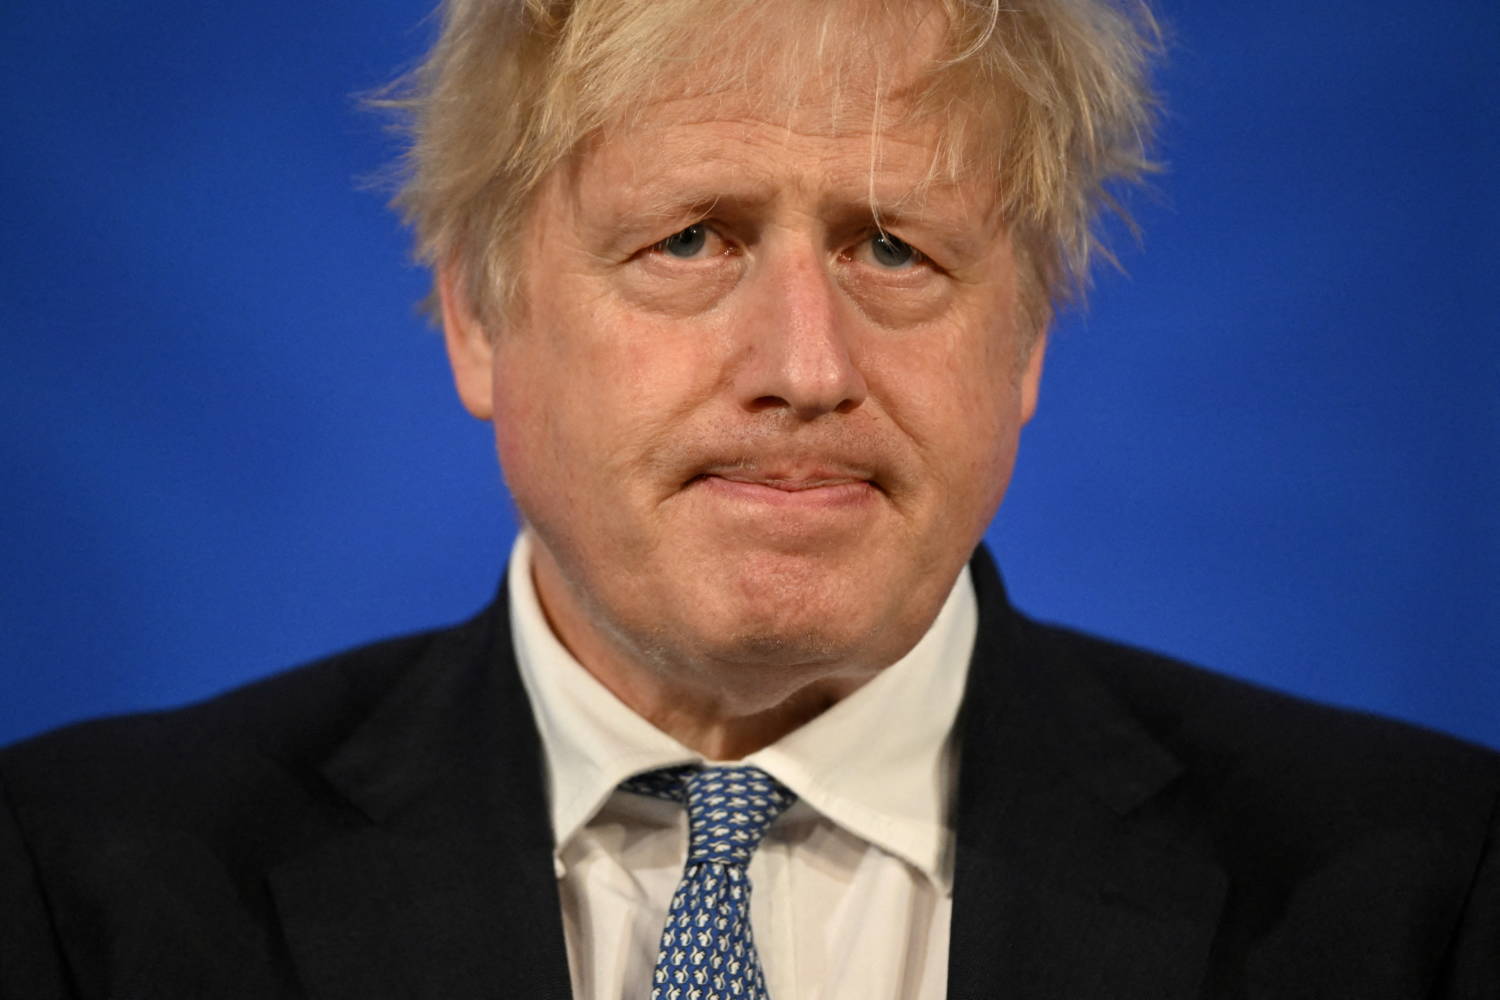 File Photo: Britain's Prime Minister Boris Johnson Holds A News Conference In Response To The Publication Of The Sue Gray Report Into 